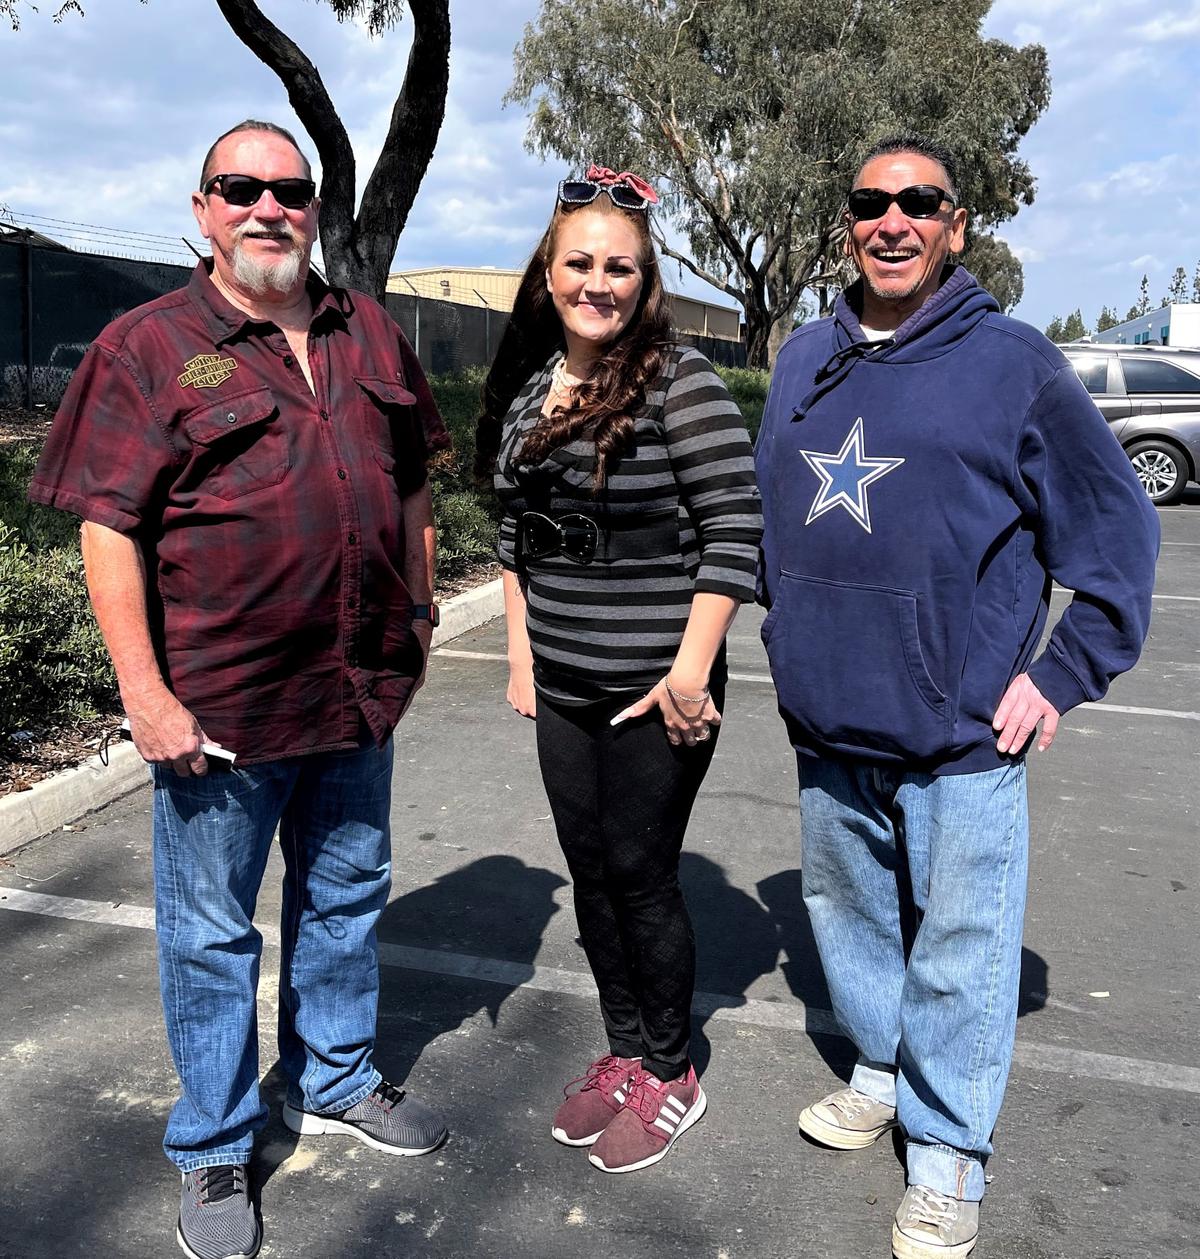 Jessica Hicks with Glenn Purbaugh (L) and Isaac Oliva (R) at the spot where she was once abandoned. (Courtesy of <a href="https://www.facebook.com/IrwindalePolice/">Irwindale Police Department</a>)